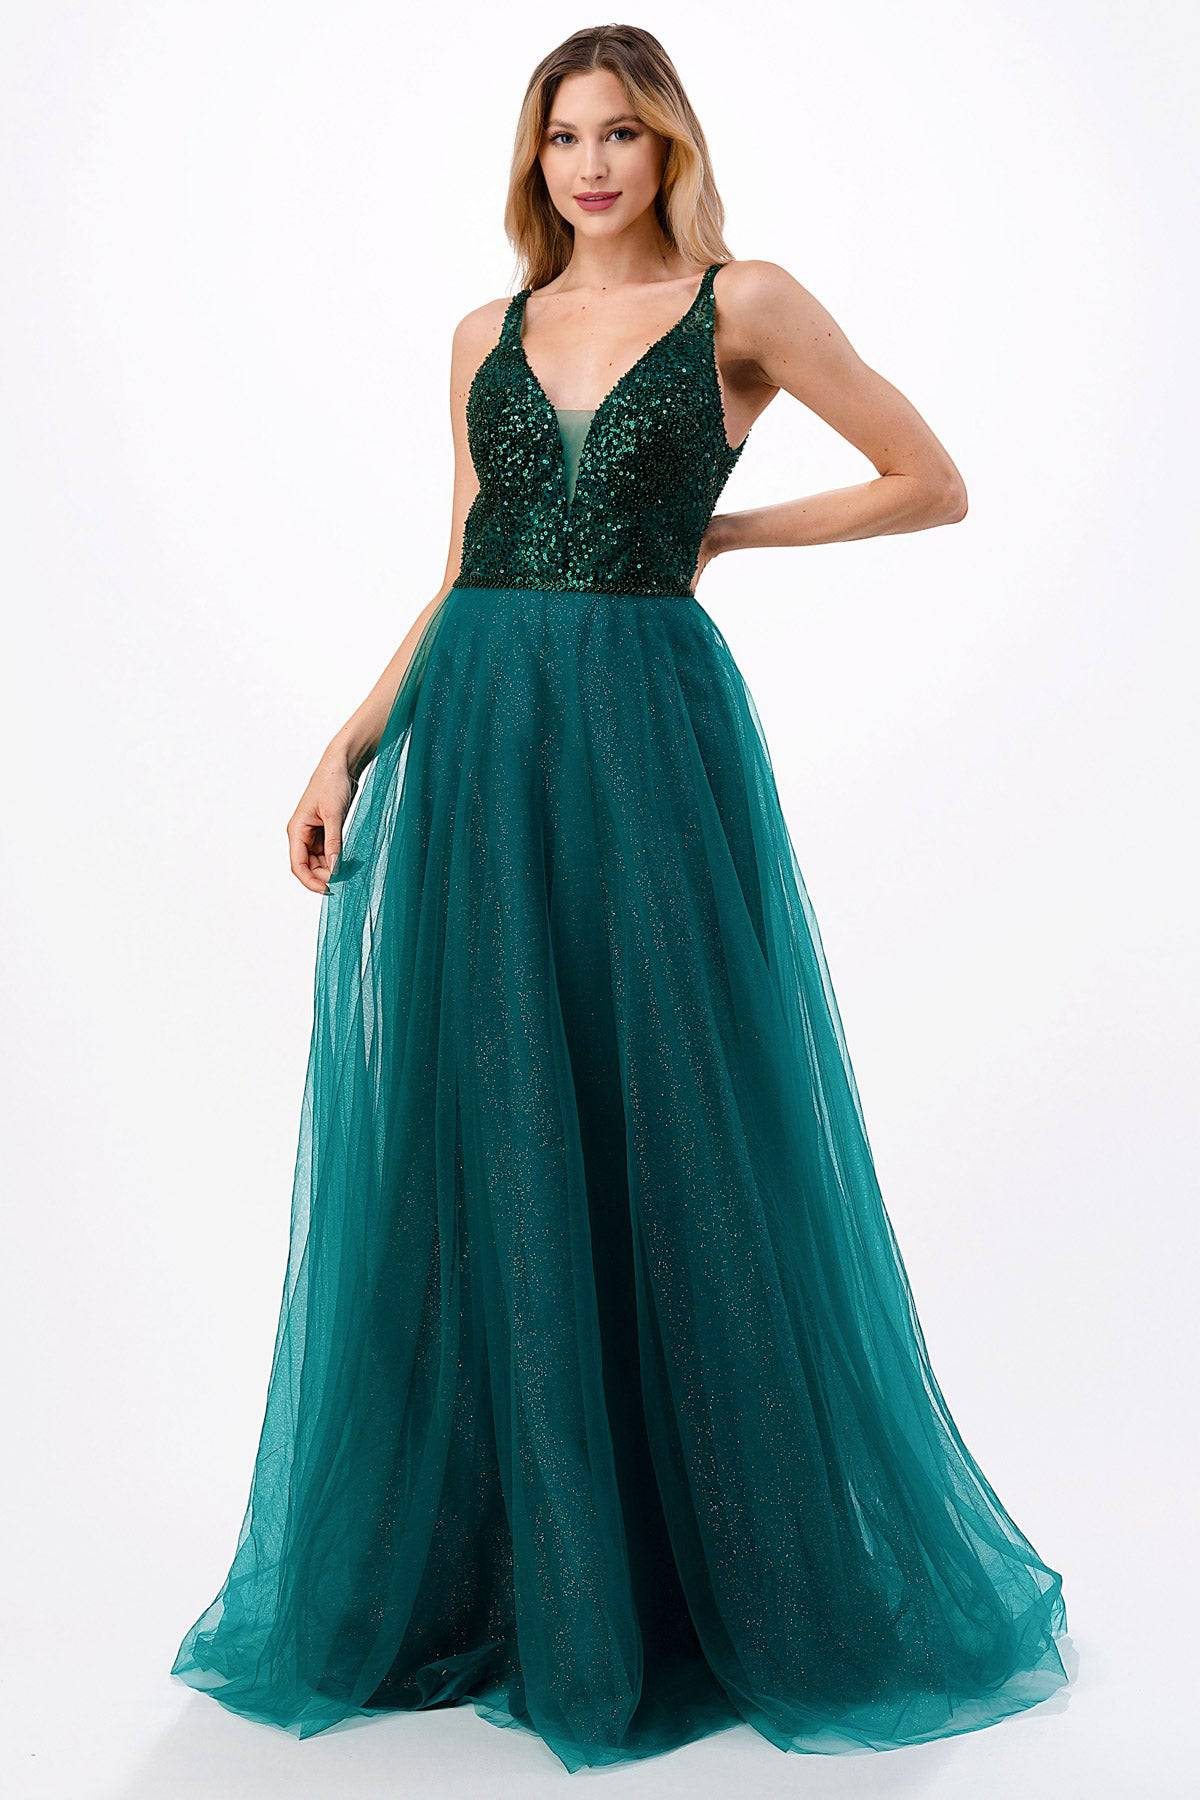 Aspeed Design L2684 Shimmering Emerald Green Gown - NORMA REED